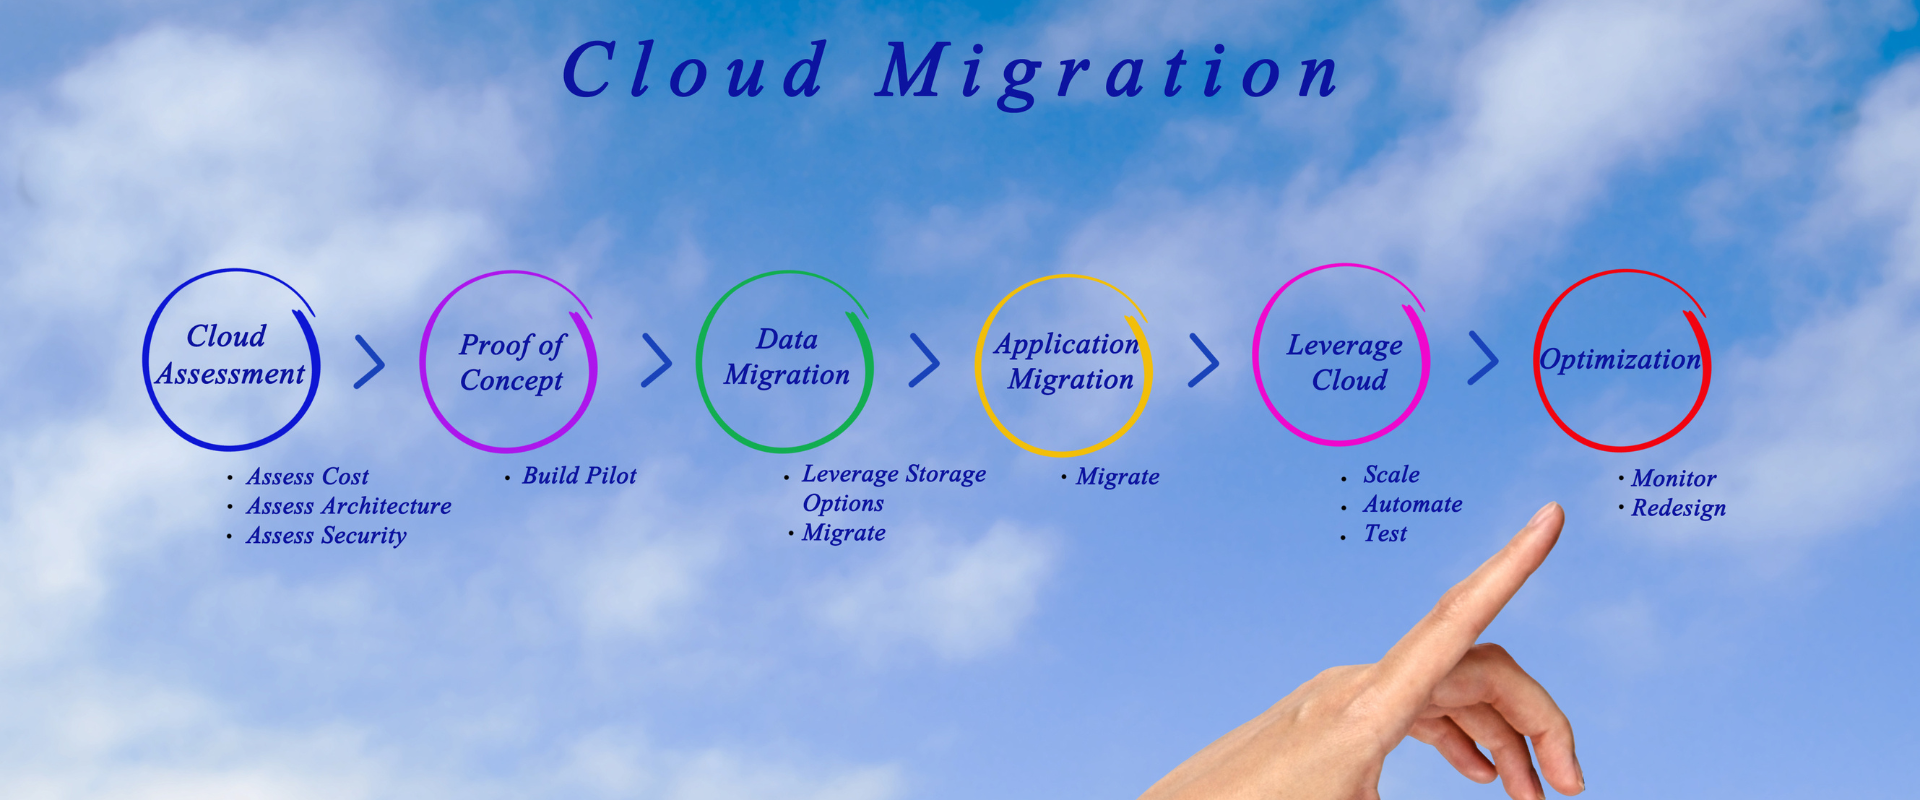 Microsoft 365 Migration Guide: Moving from On-Premises to Cloud